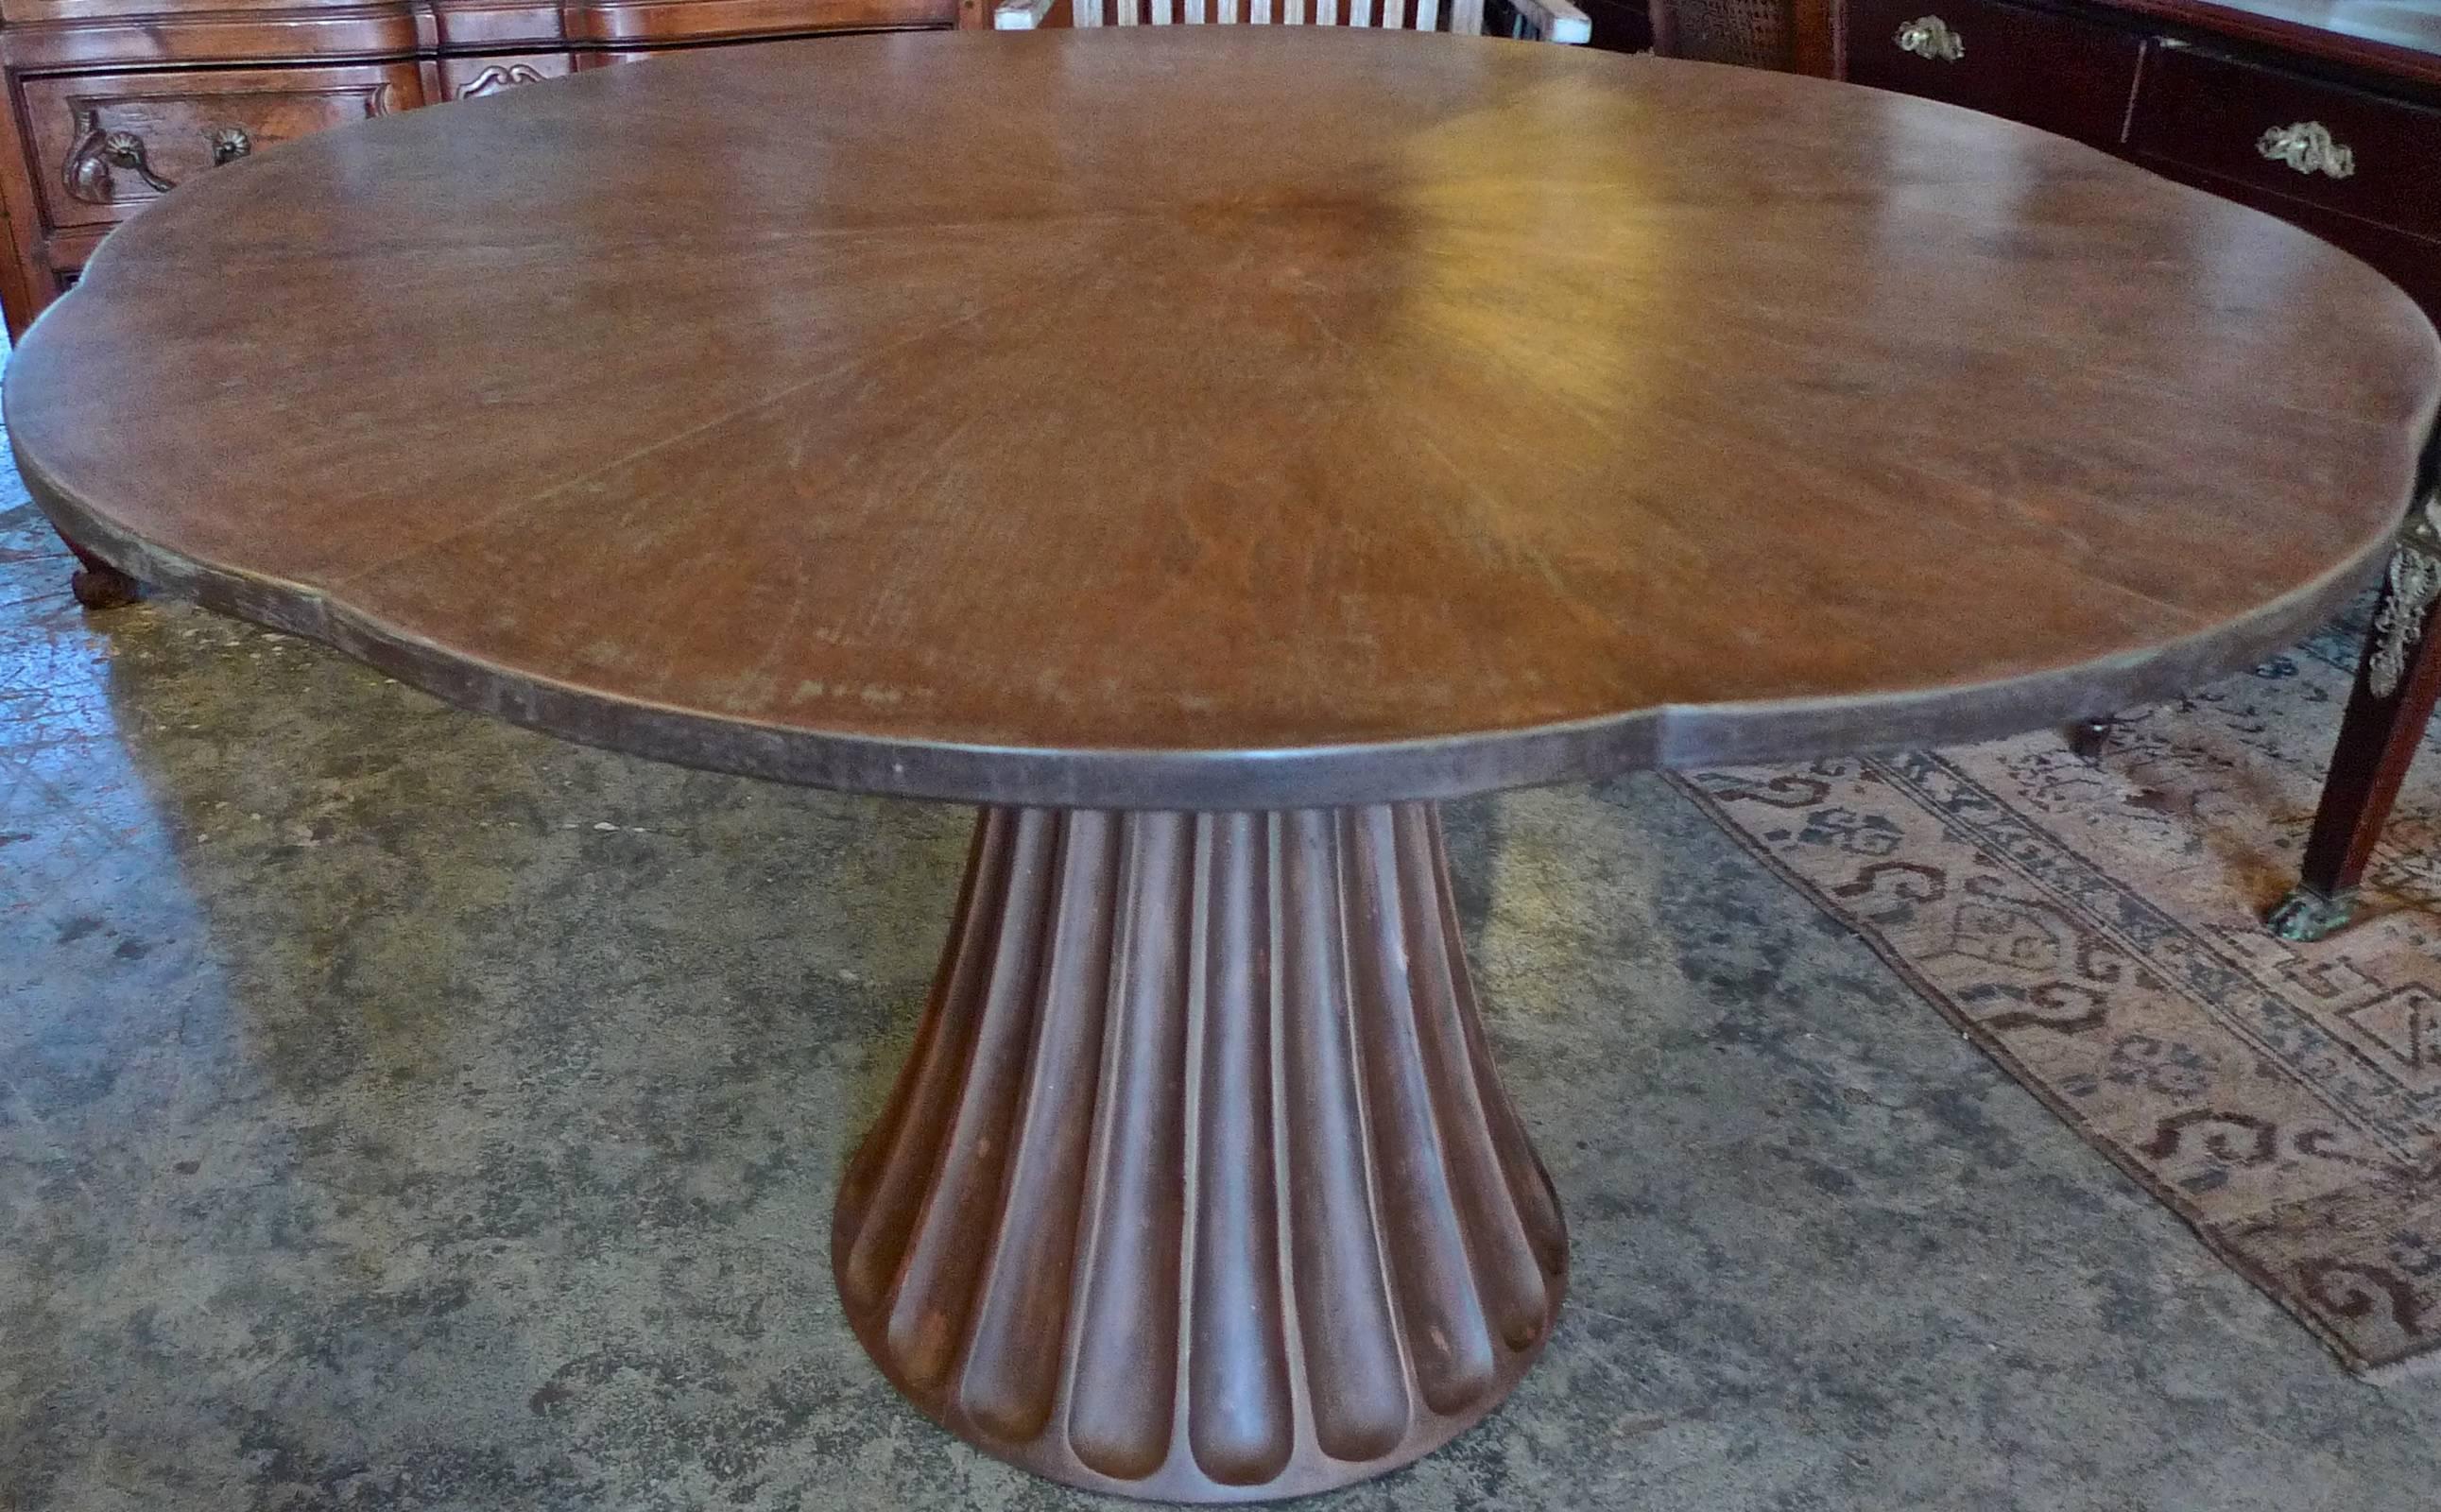 Reproduction 19th century style stained carved wood pedestal breakfast table.
 